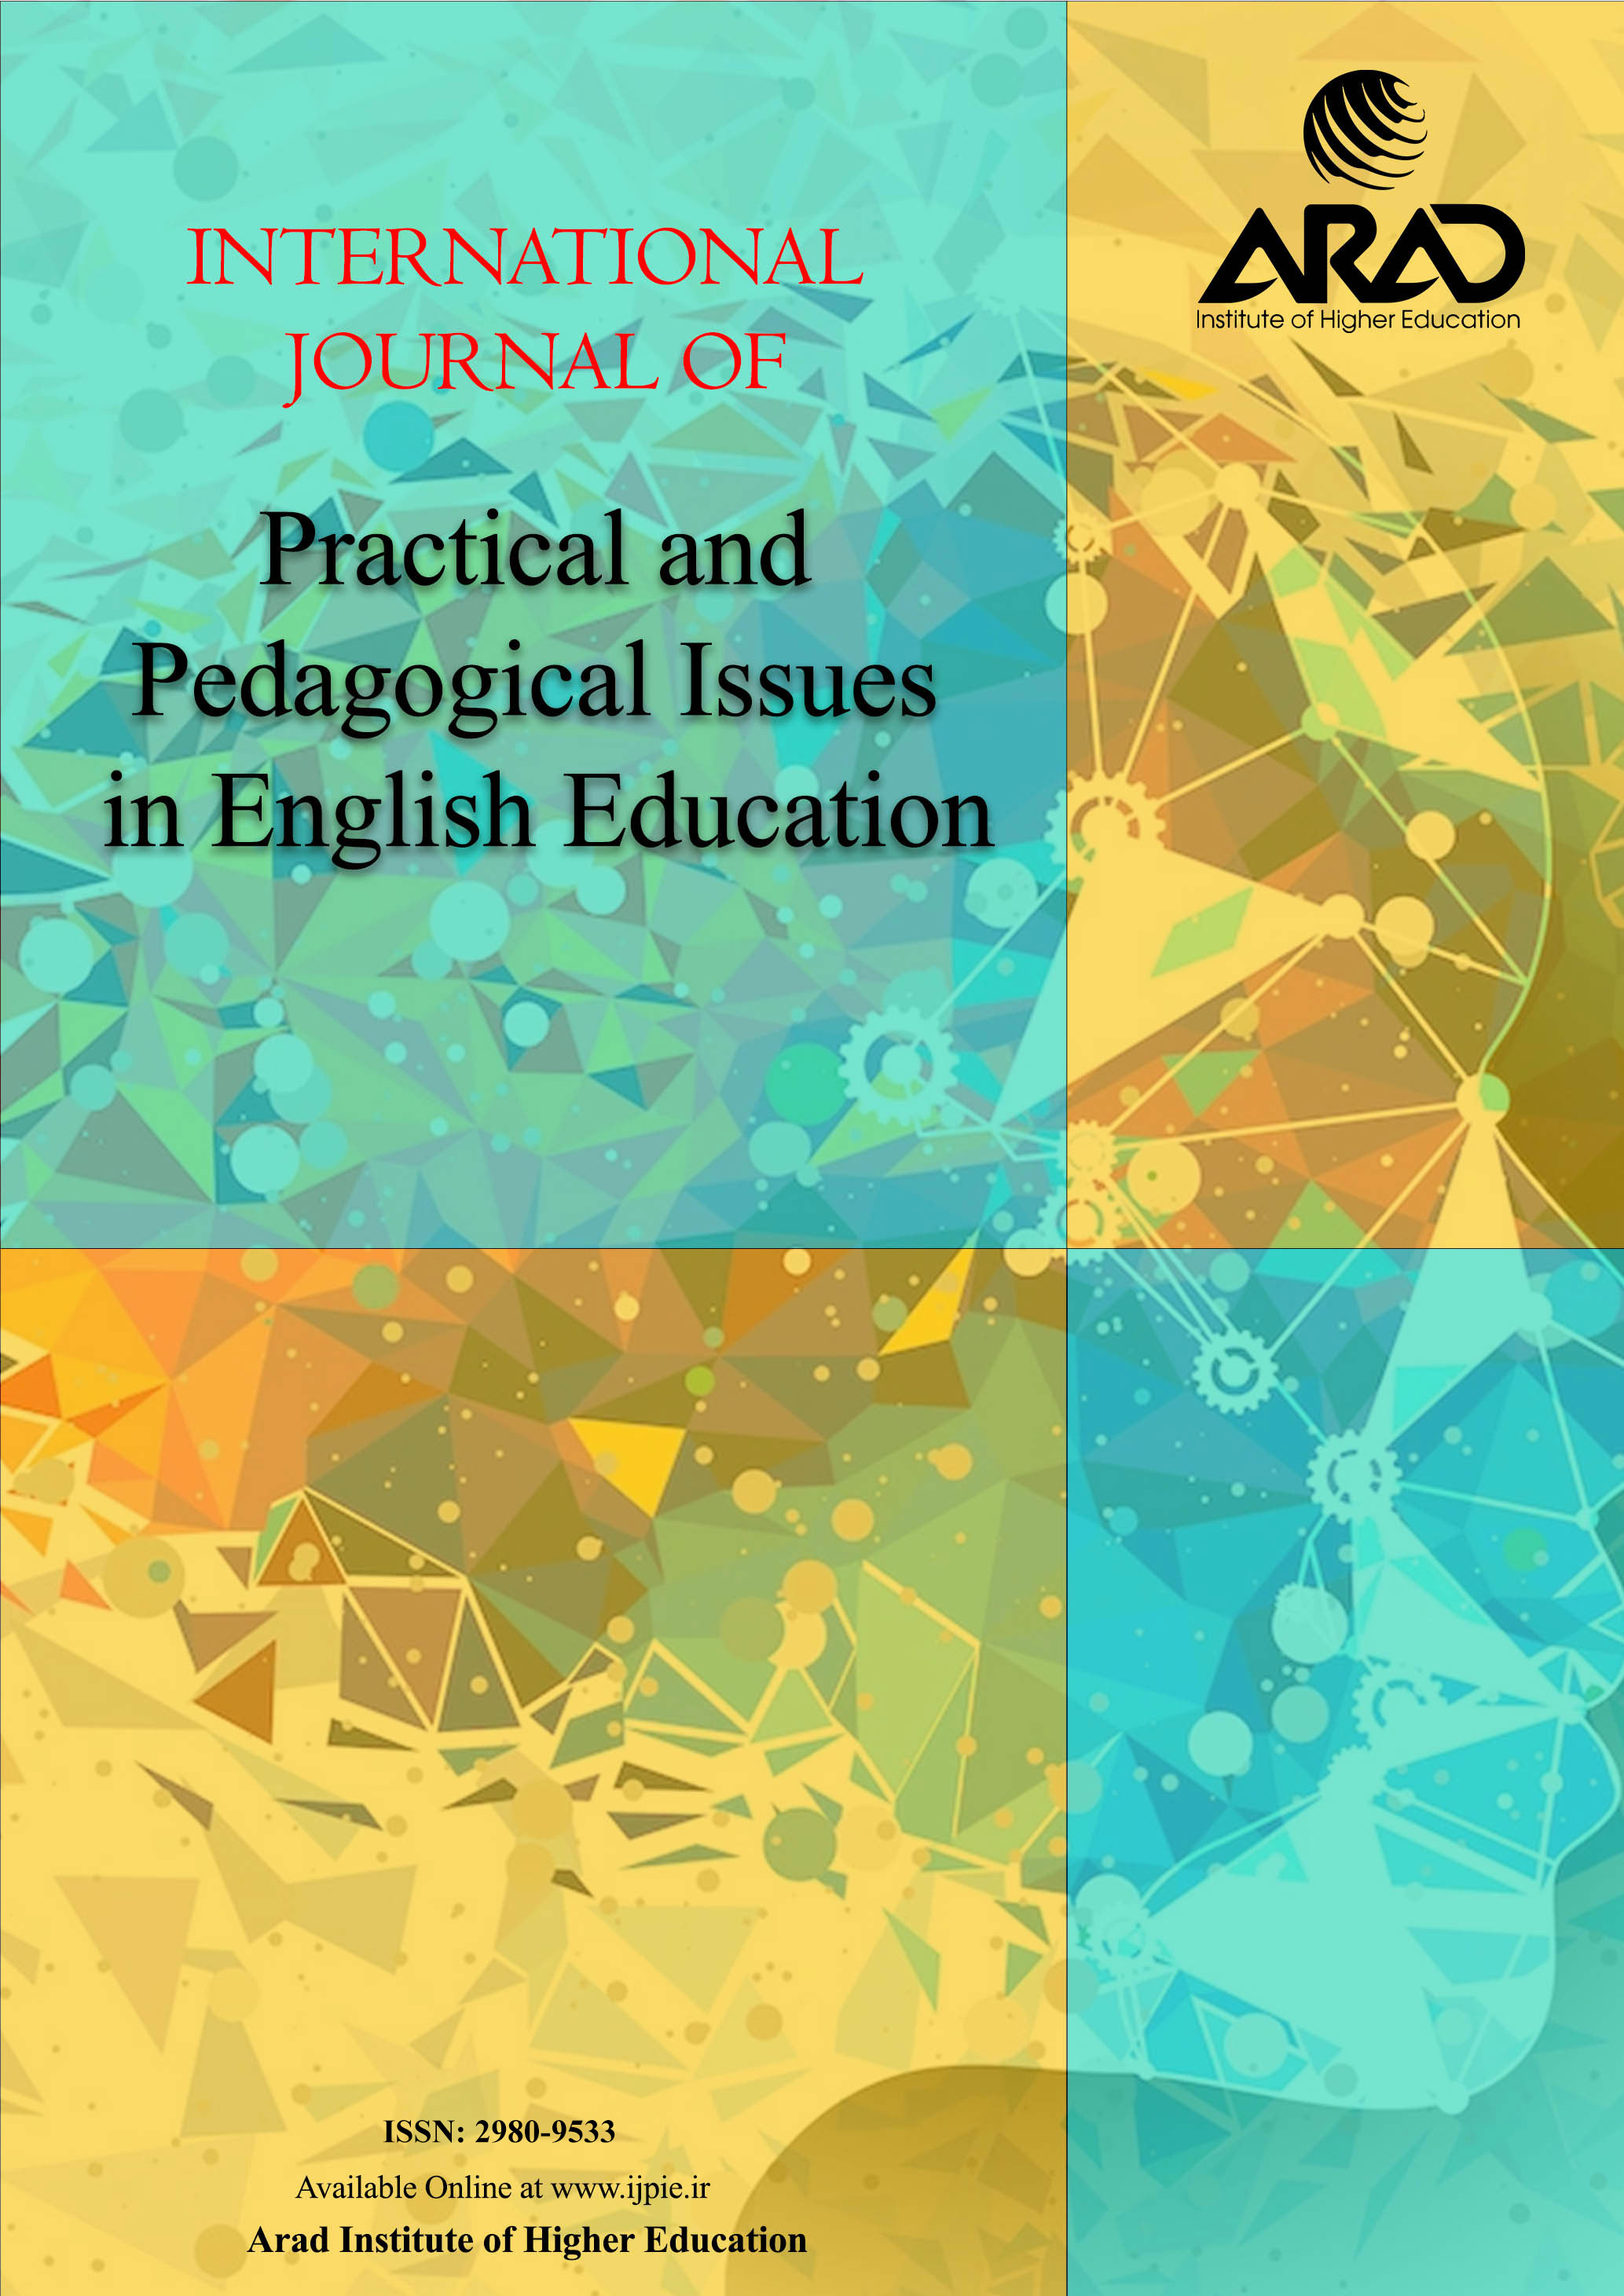 International Journal of Practical and Pedagogical Issues in English Education